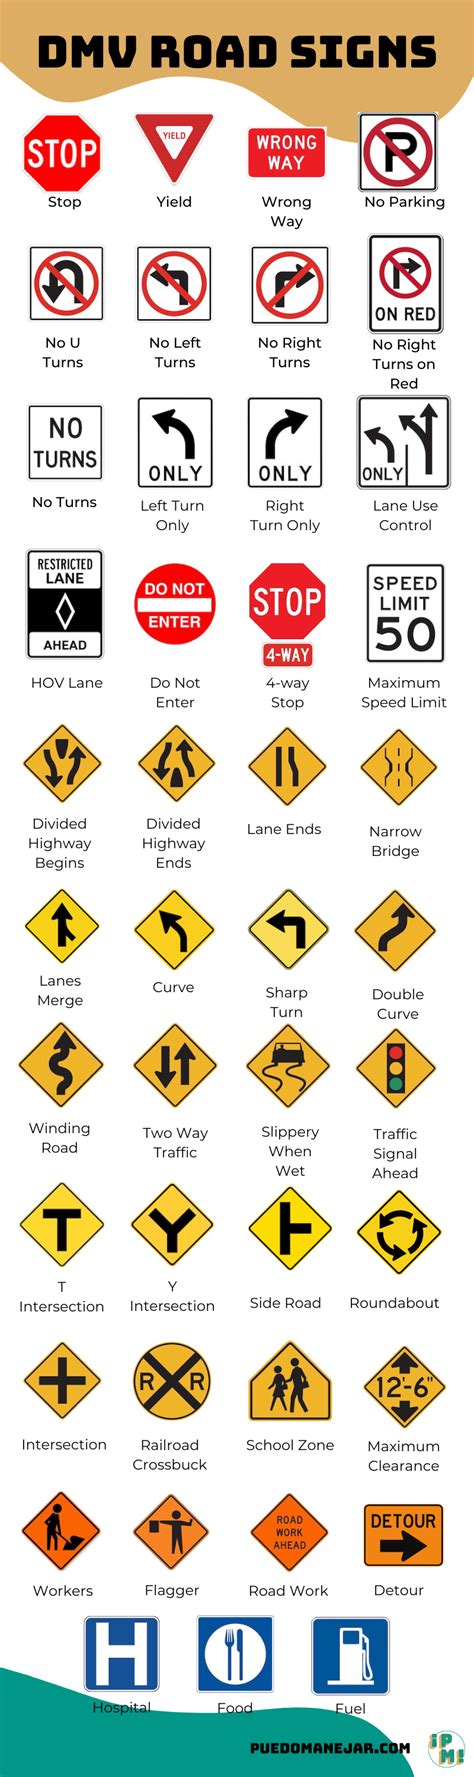 The questions are multiple choice and are based on the material in the Ohio Driver's Manual. The Ohio DMV written test is designed to check your knowledge of traffic signs, identification of signals and pavement markings, road rules and safe driving practices. The test consists of 40 questions. To pass the Ohio DMV written test, you are allowed .... 